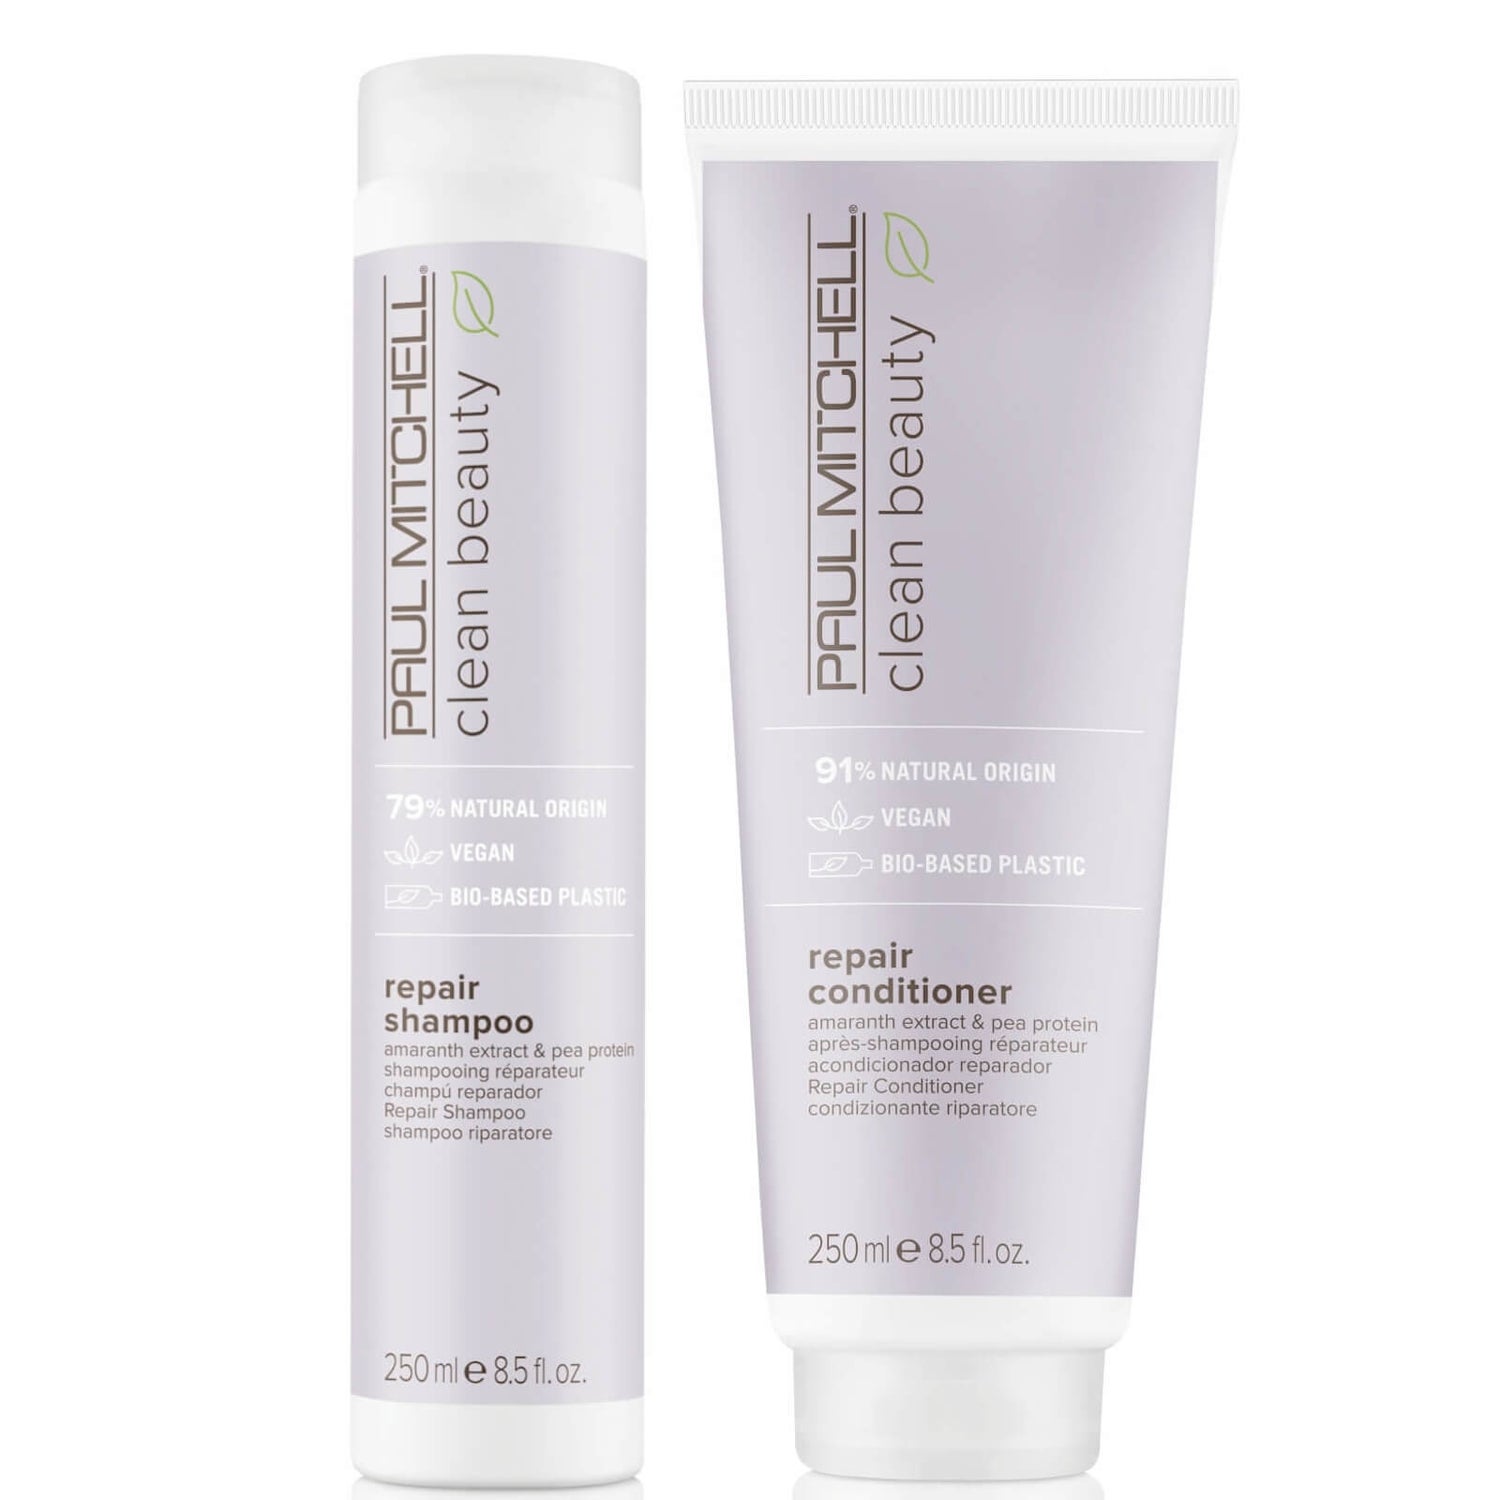 Paul Mitchell Clean Beauty Repair Shampoo and Conditioner Set